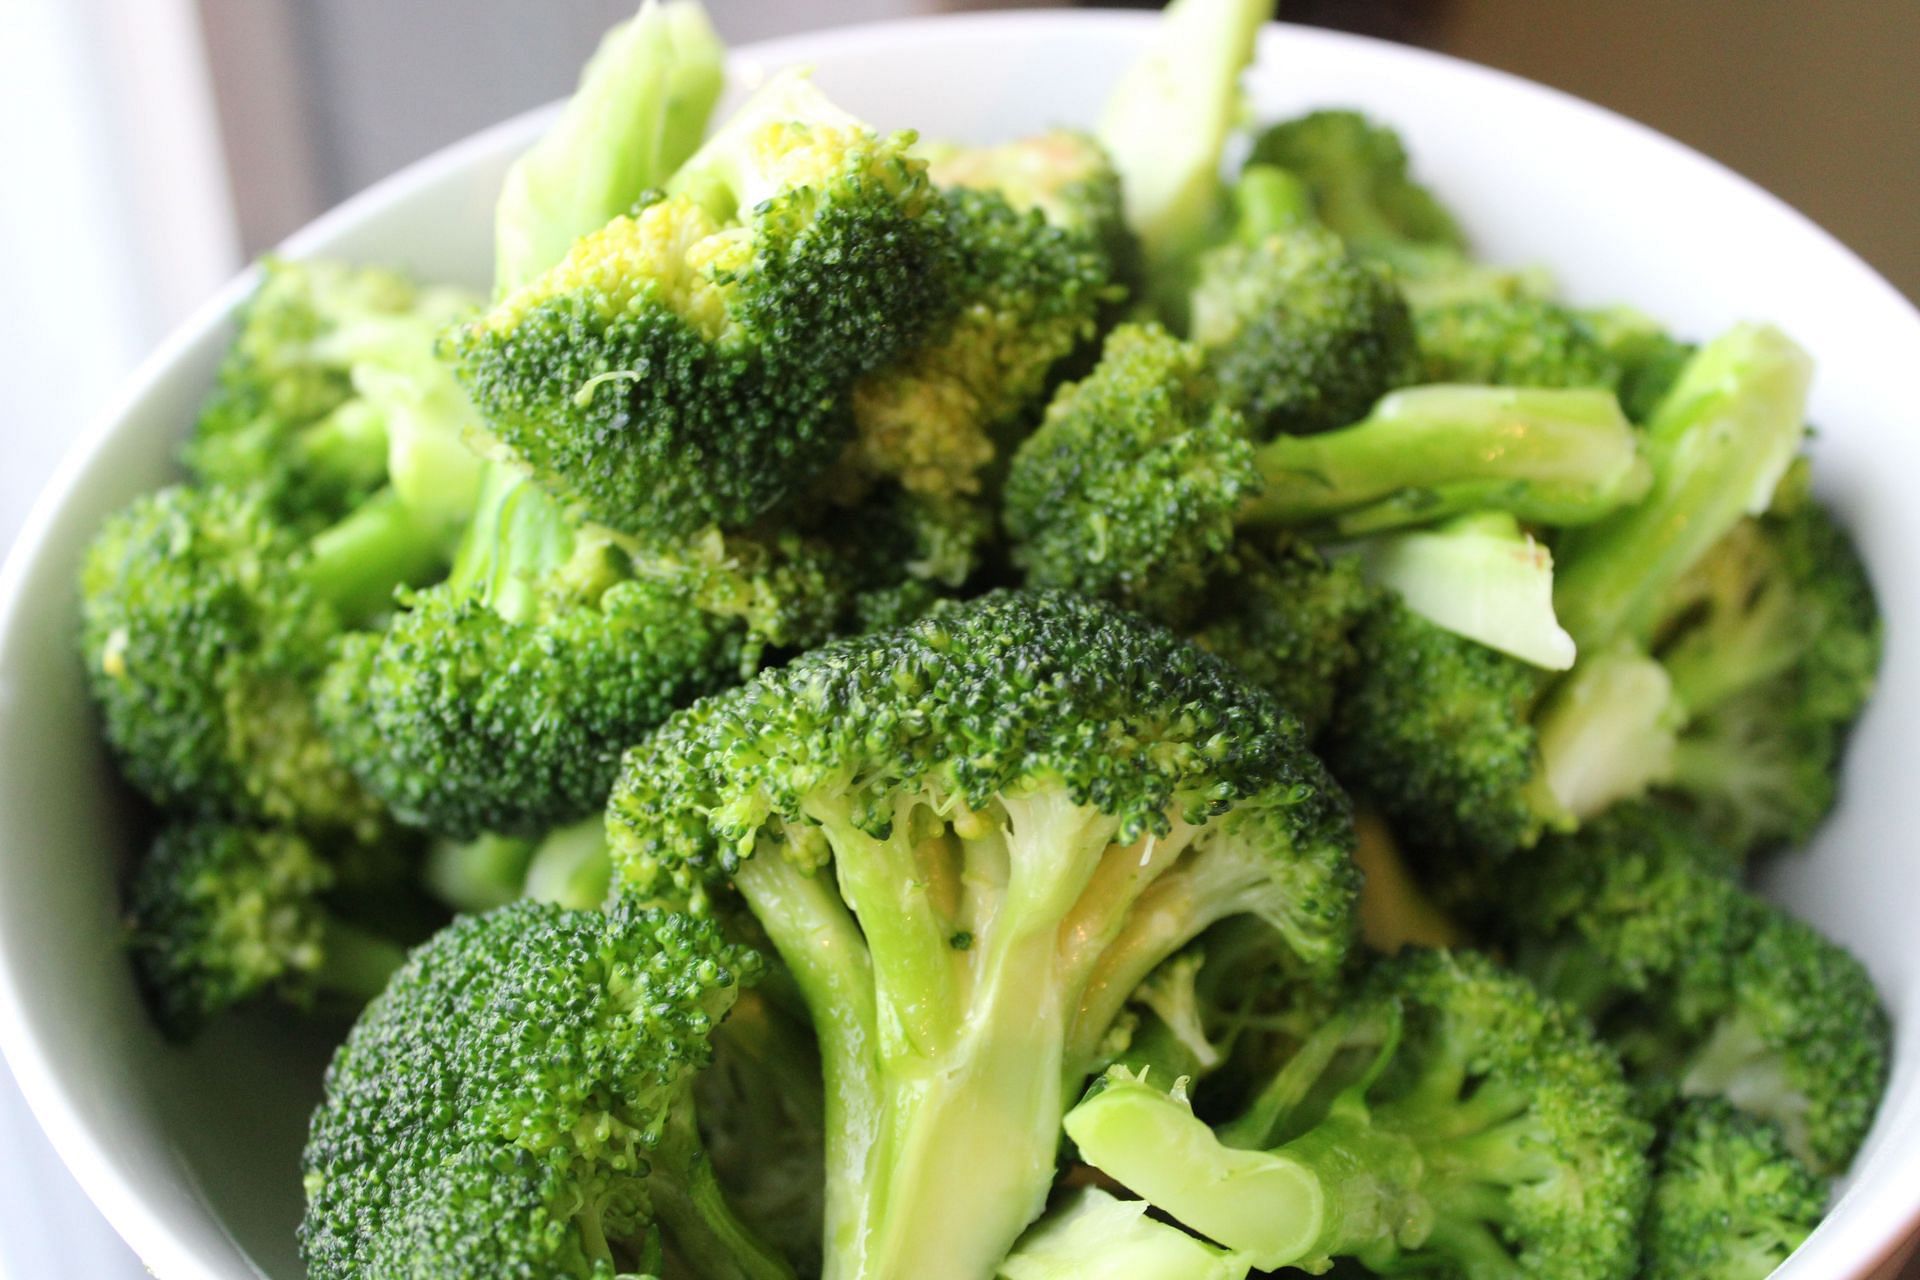 Broccoli is one of the healthiest vegetables to have on a weight loss diet. (Image via Unsplash/Tyrrell Fitness and Nutrition)